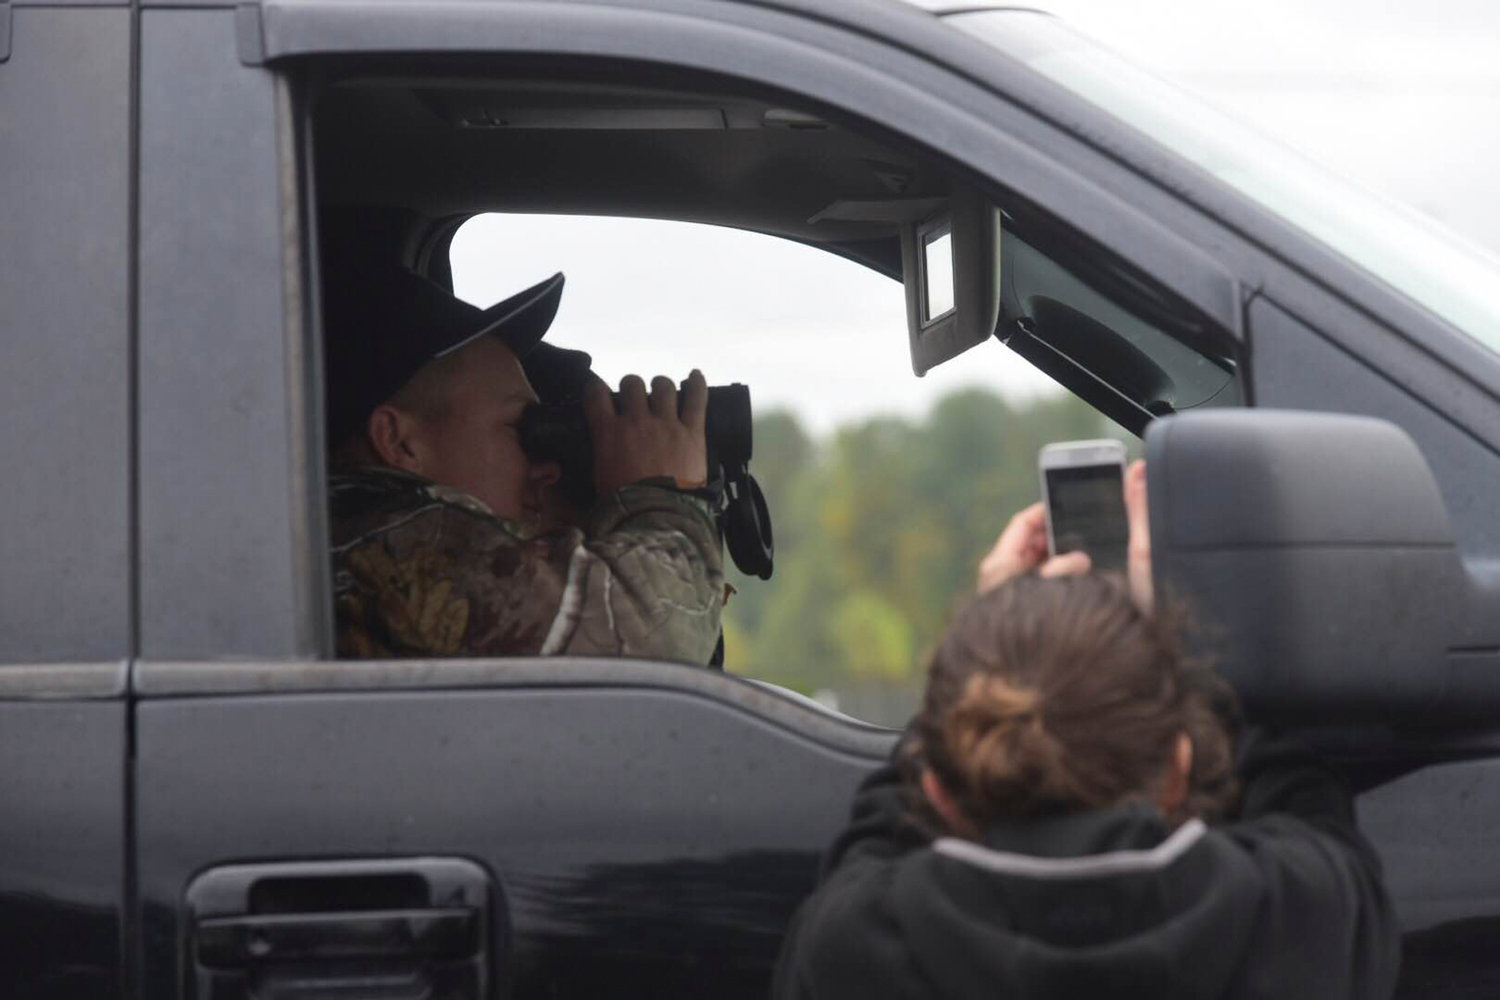 A person waiting for information on the Centralia High School lockdown uses binoculars to get a closer look while in his vehicle at the Community Church of God across from the high school. 